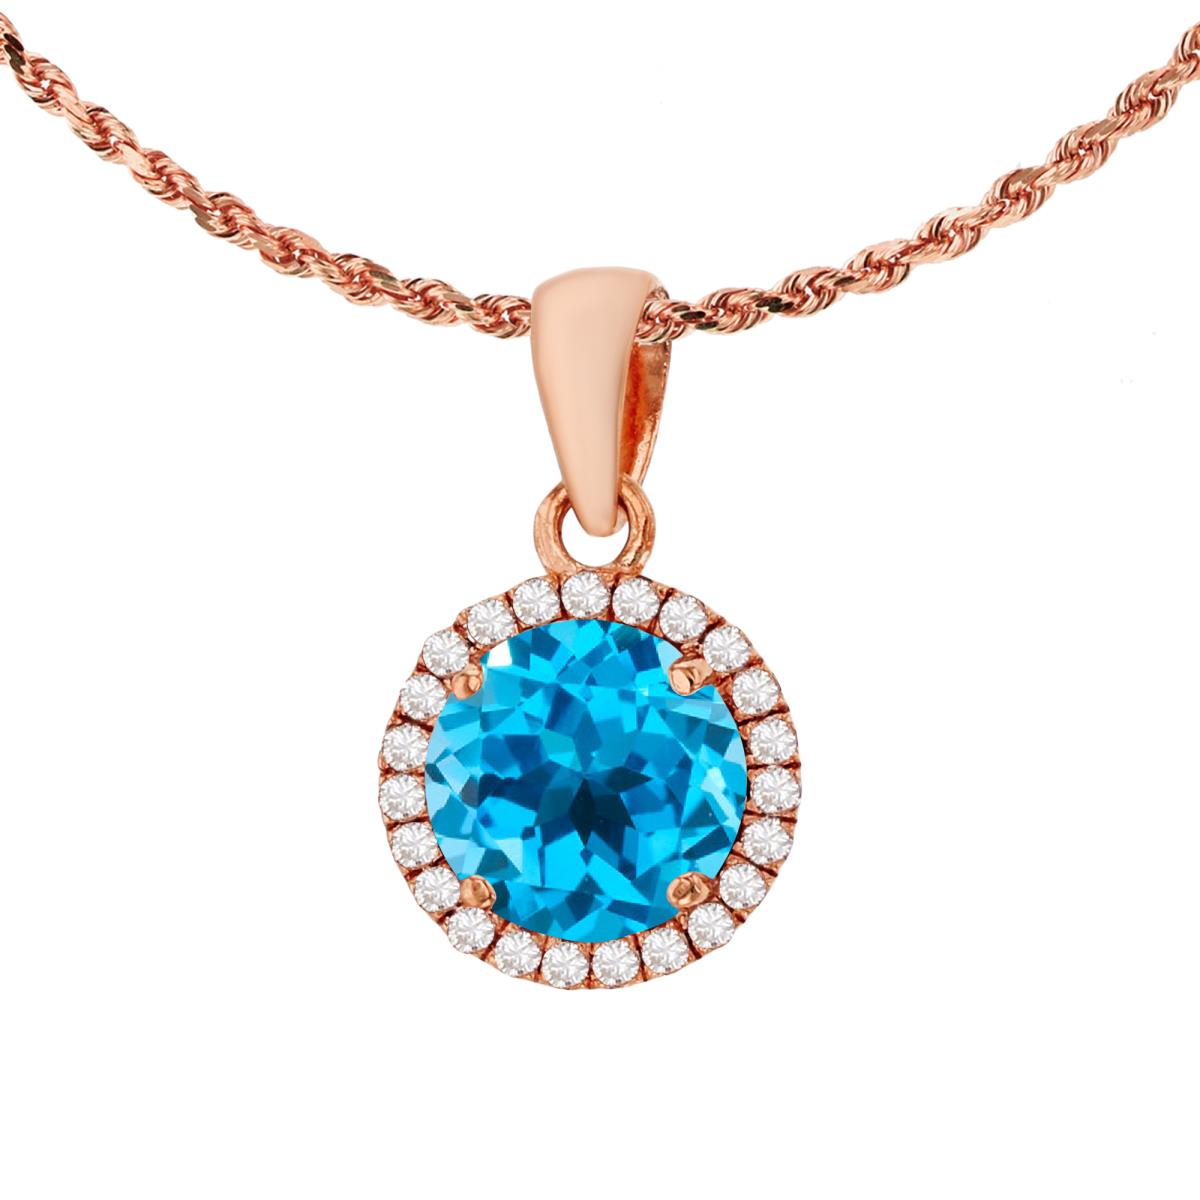 10K Rose Gold 7mm Round Swiss Blue Topaz & 0.12 CTTW Diamond Halo 18" Rope Chain Necklace